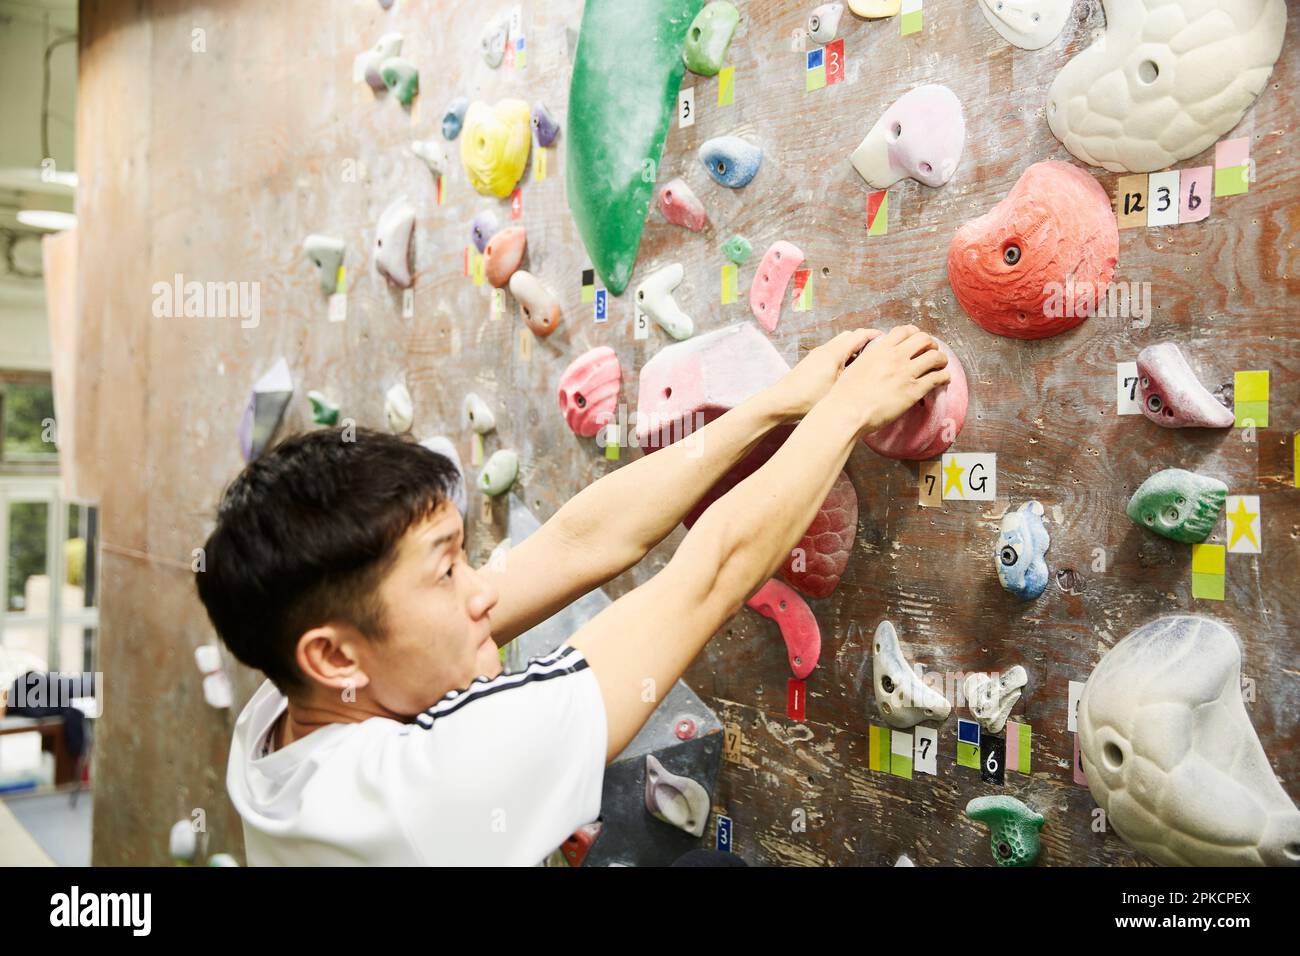 Man grasping the start hold with both hands while bouldering Stock Photo